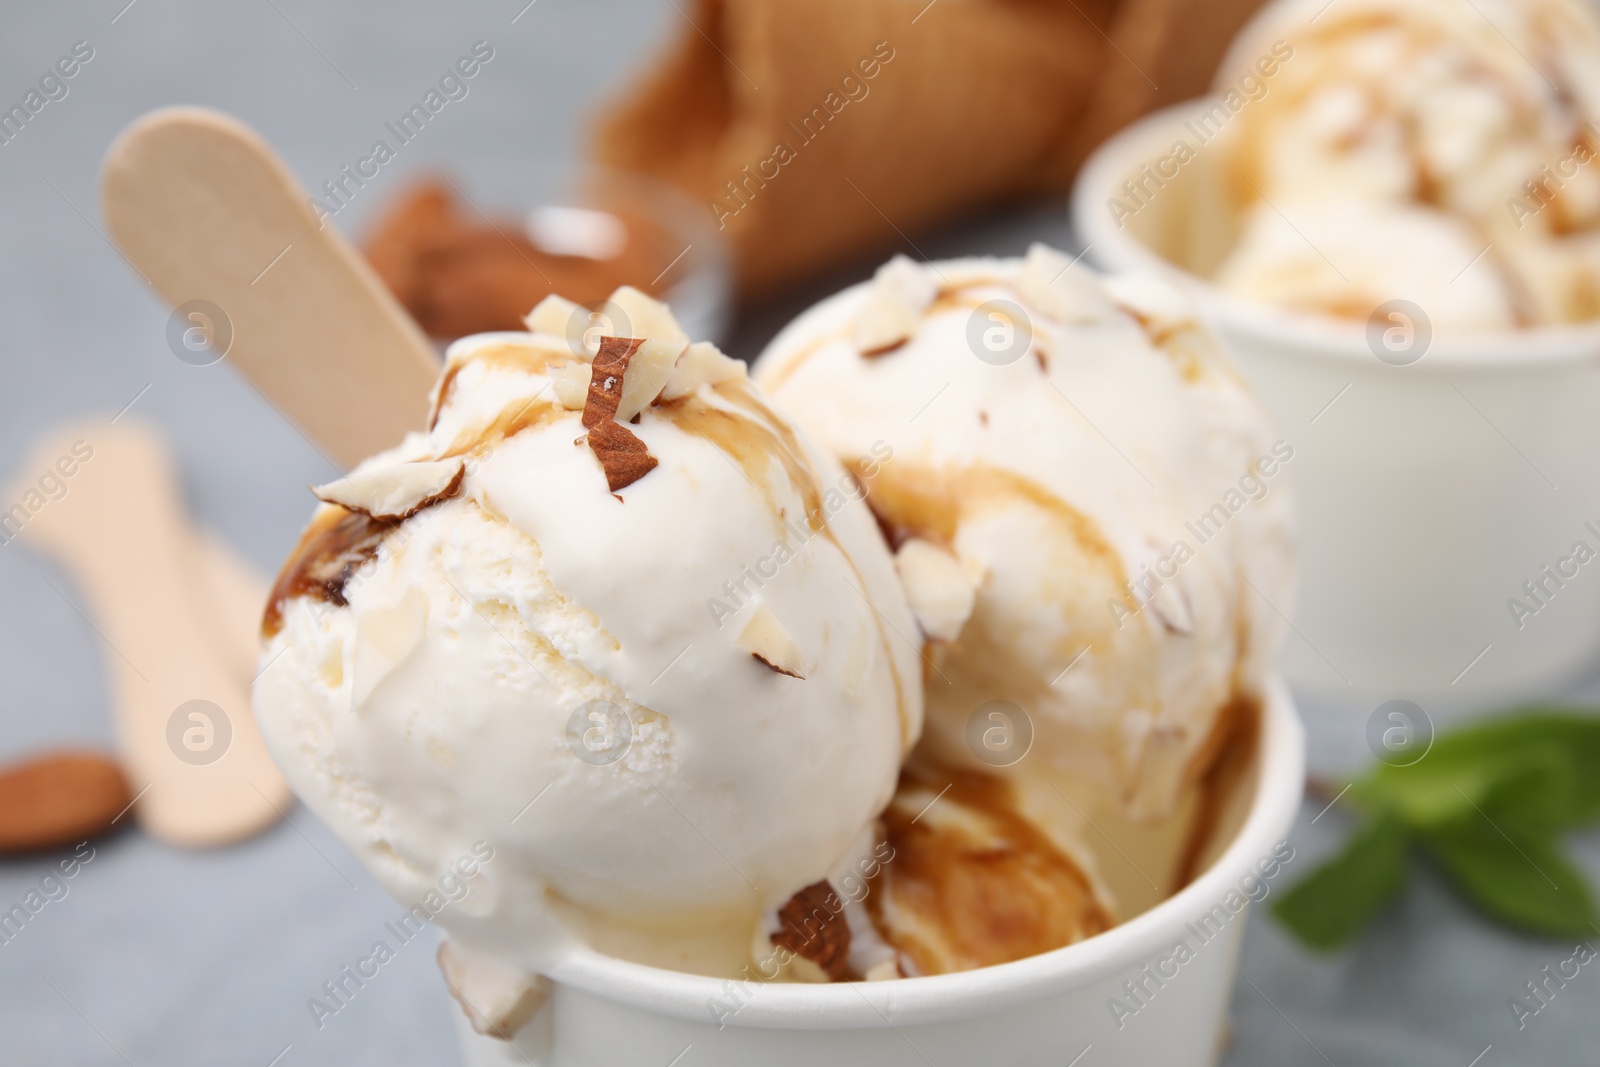 Photo of Scoops of ice cream with caramel sauce and nuts in paper cup, closeup